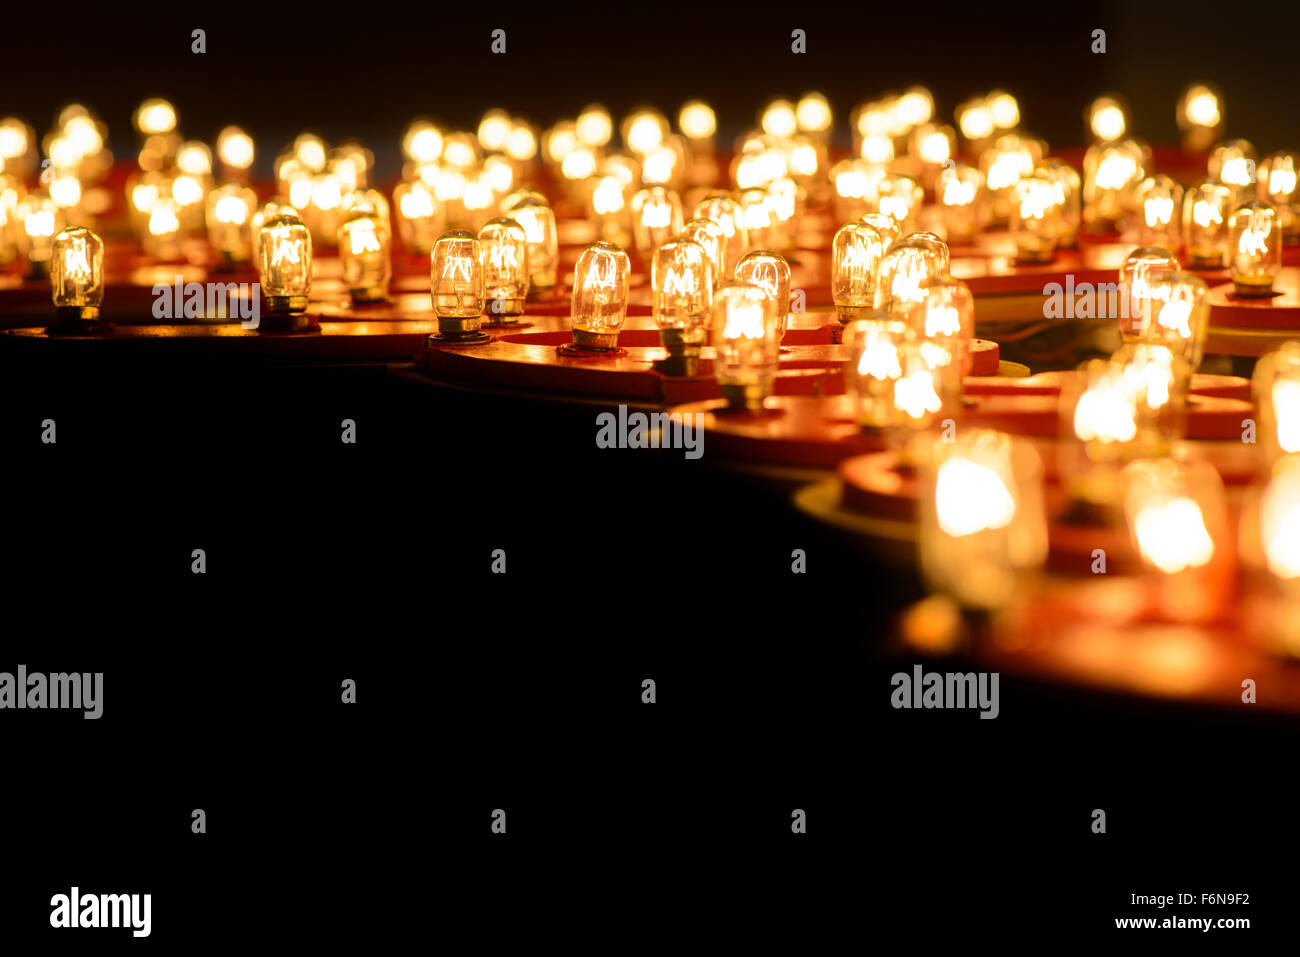 Glowing round tungsten lamps Stock Photo